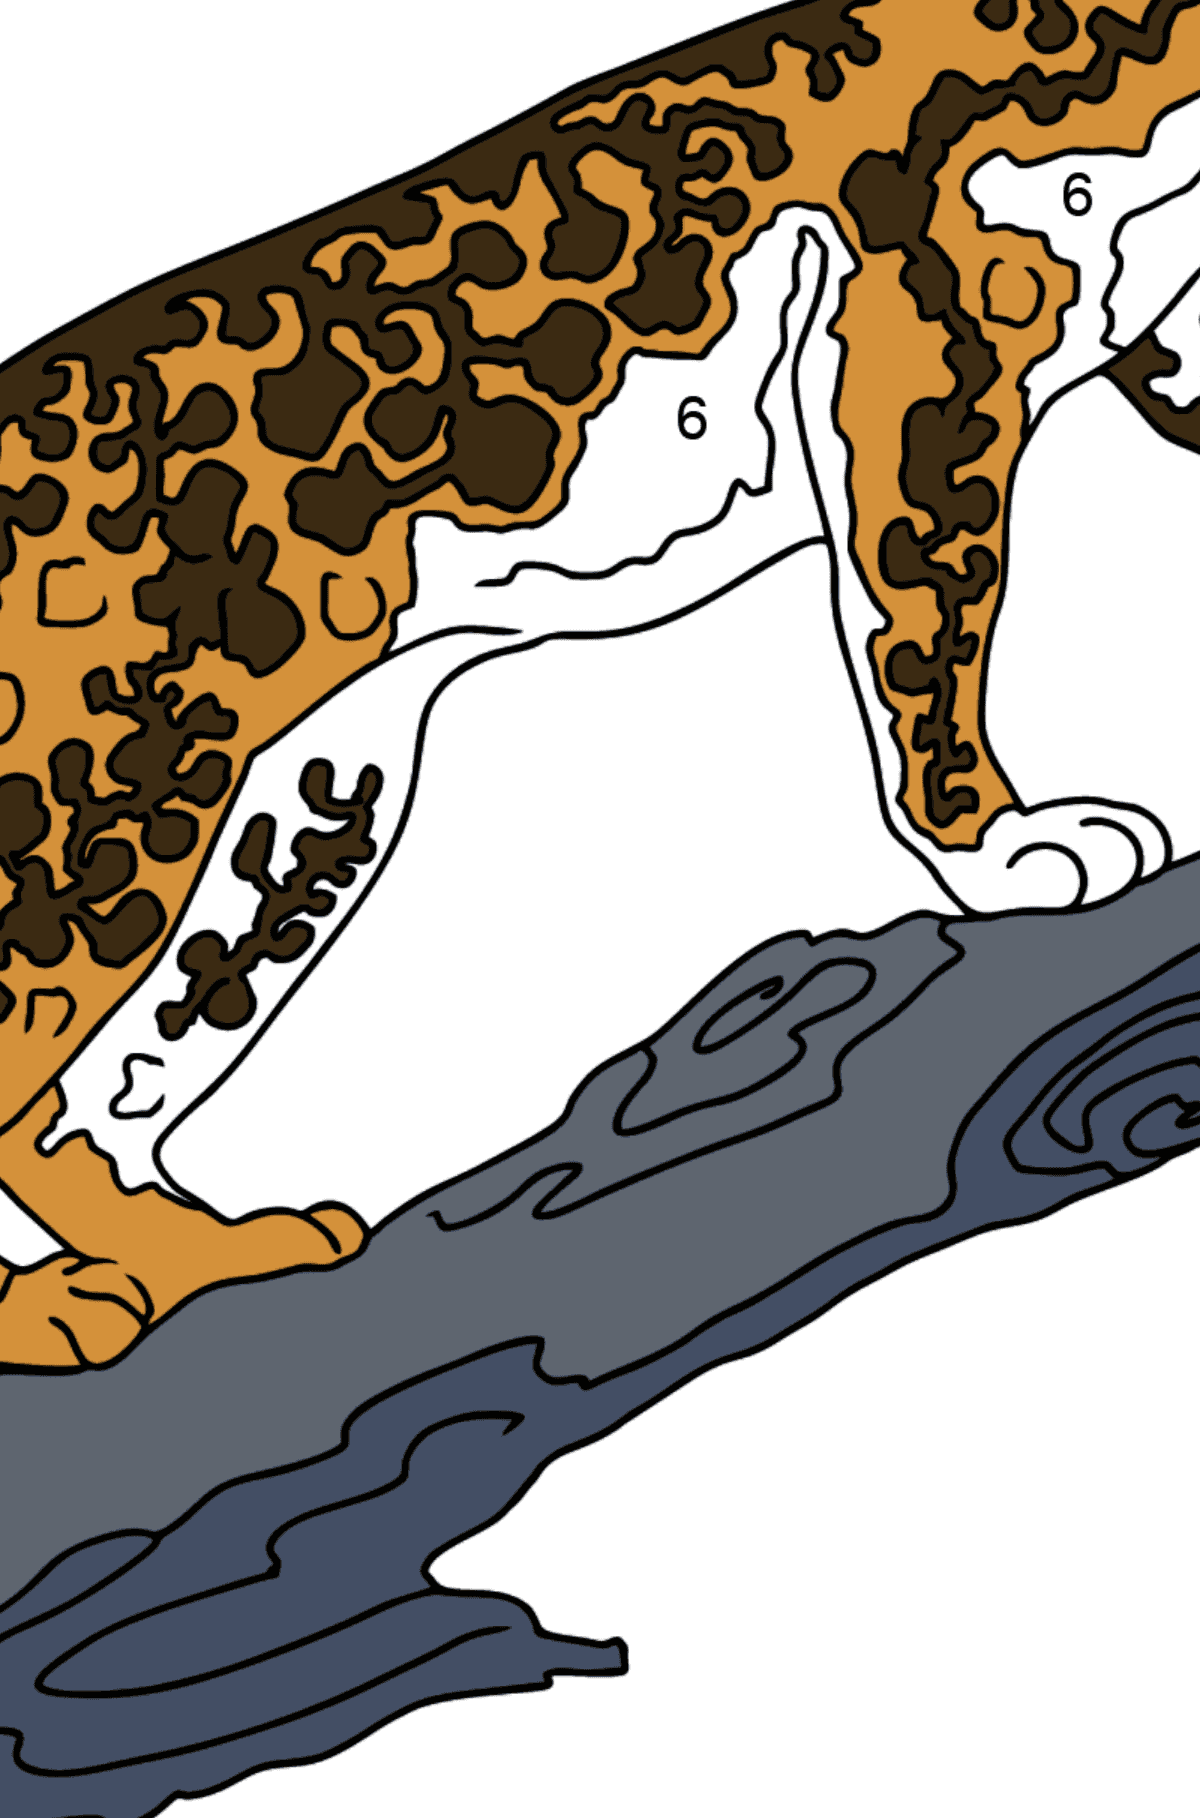 Coloring Page - A Leopard is Getting Ready for a Jump - Coloring by Numbers for Kids